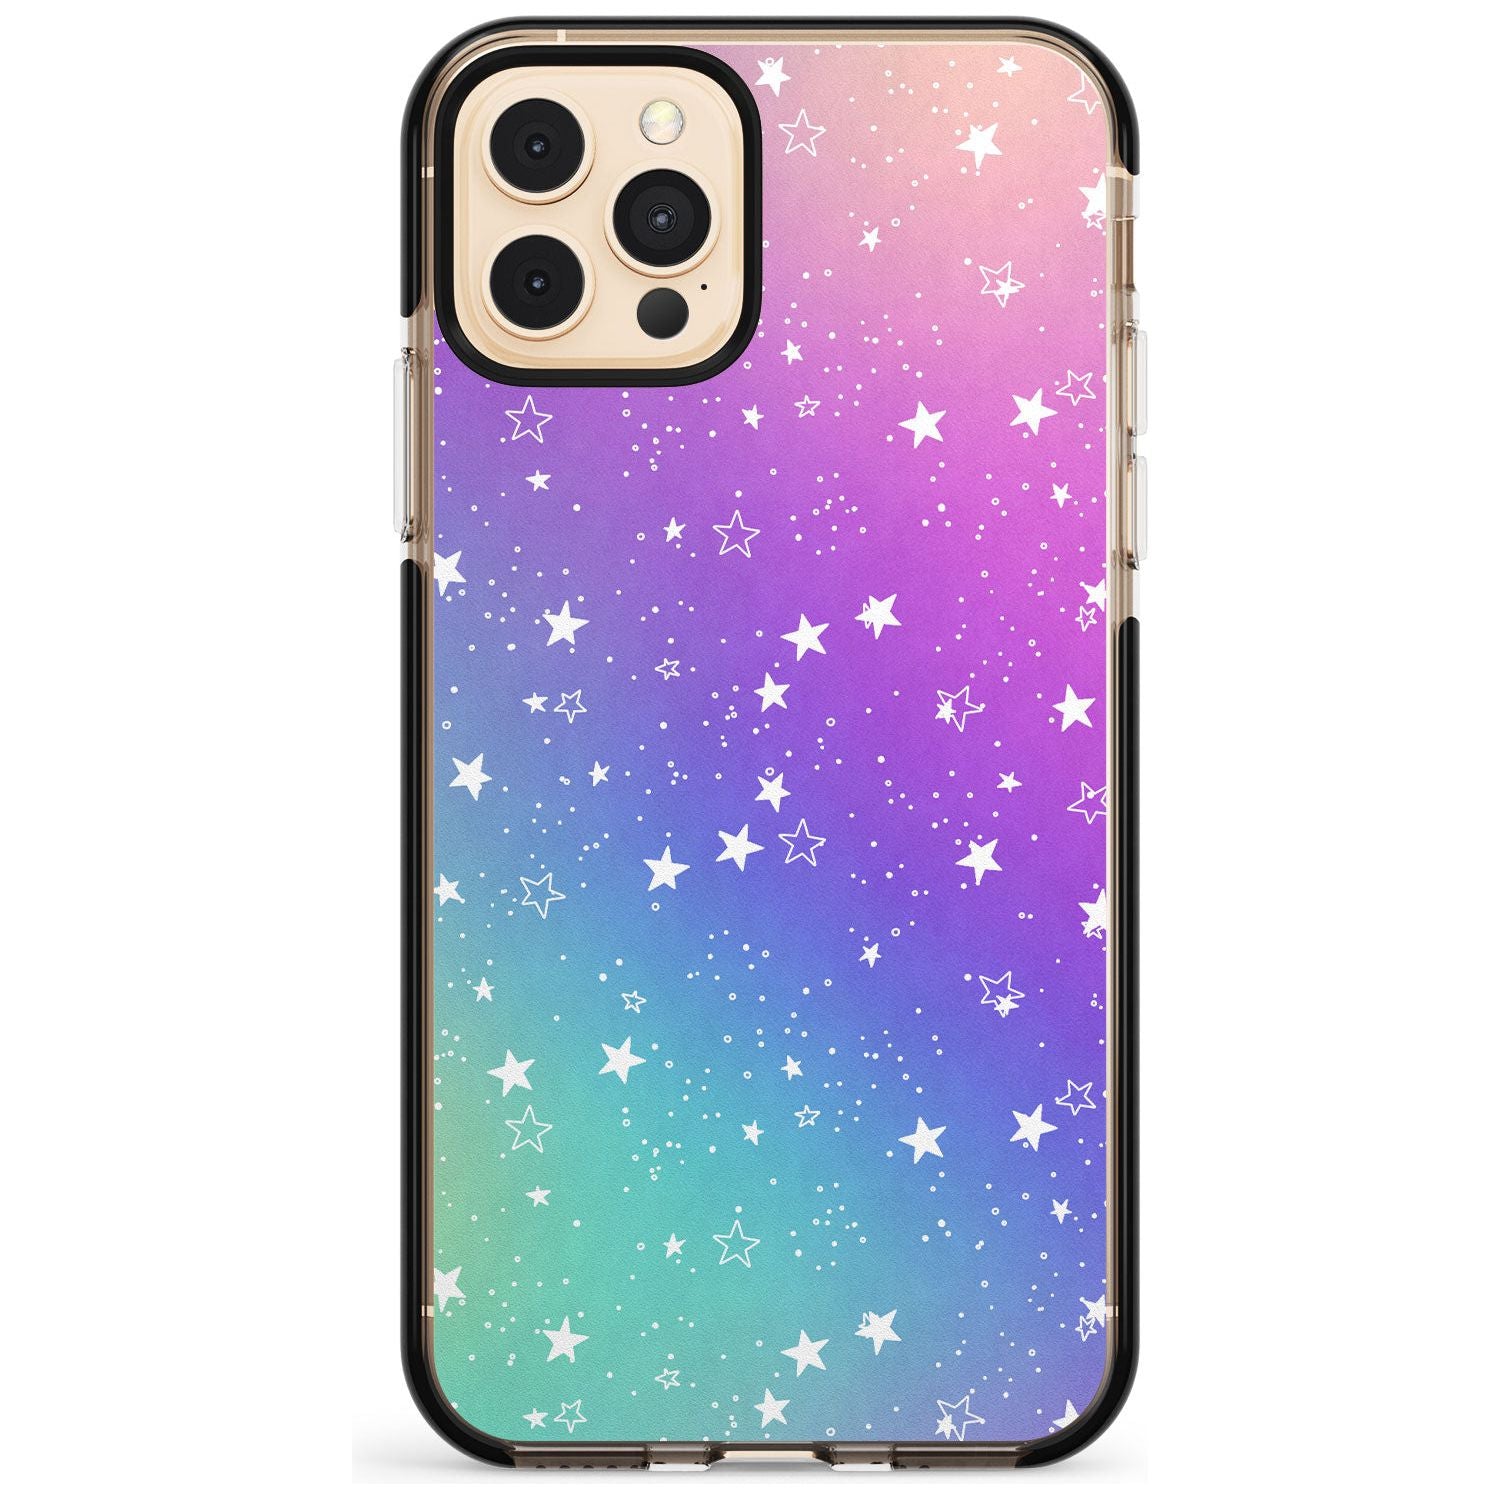 White Stars on Pastels Pink Fade Impact Phone Case for iPhone 11